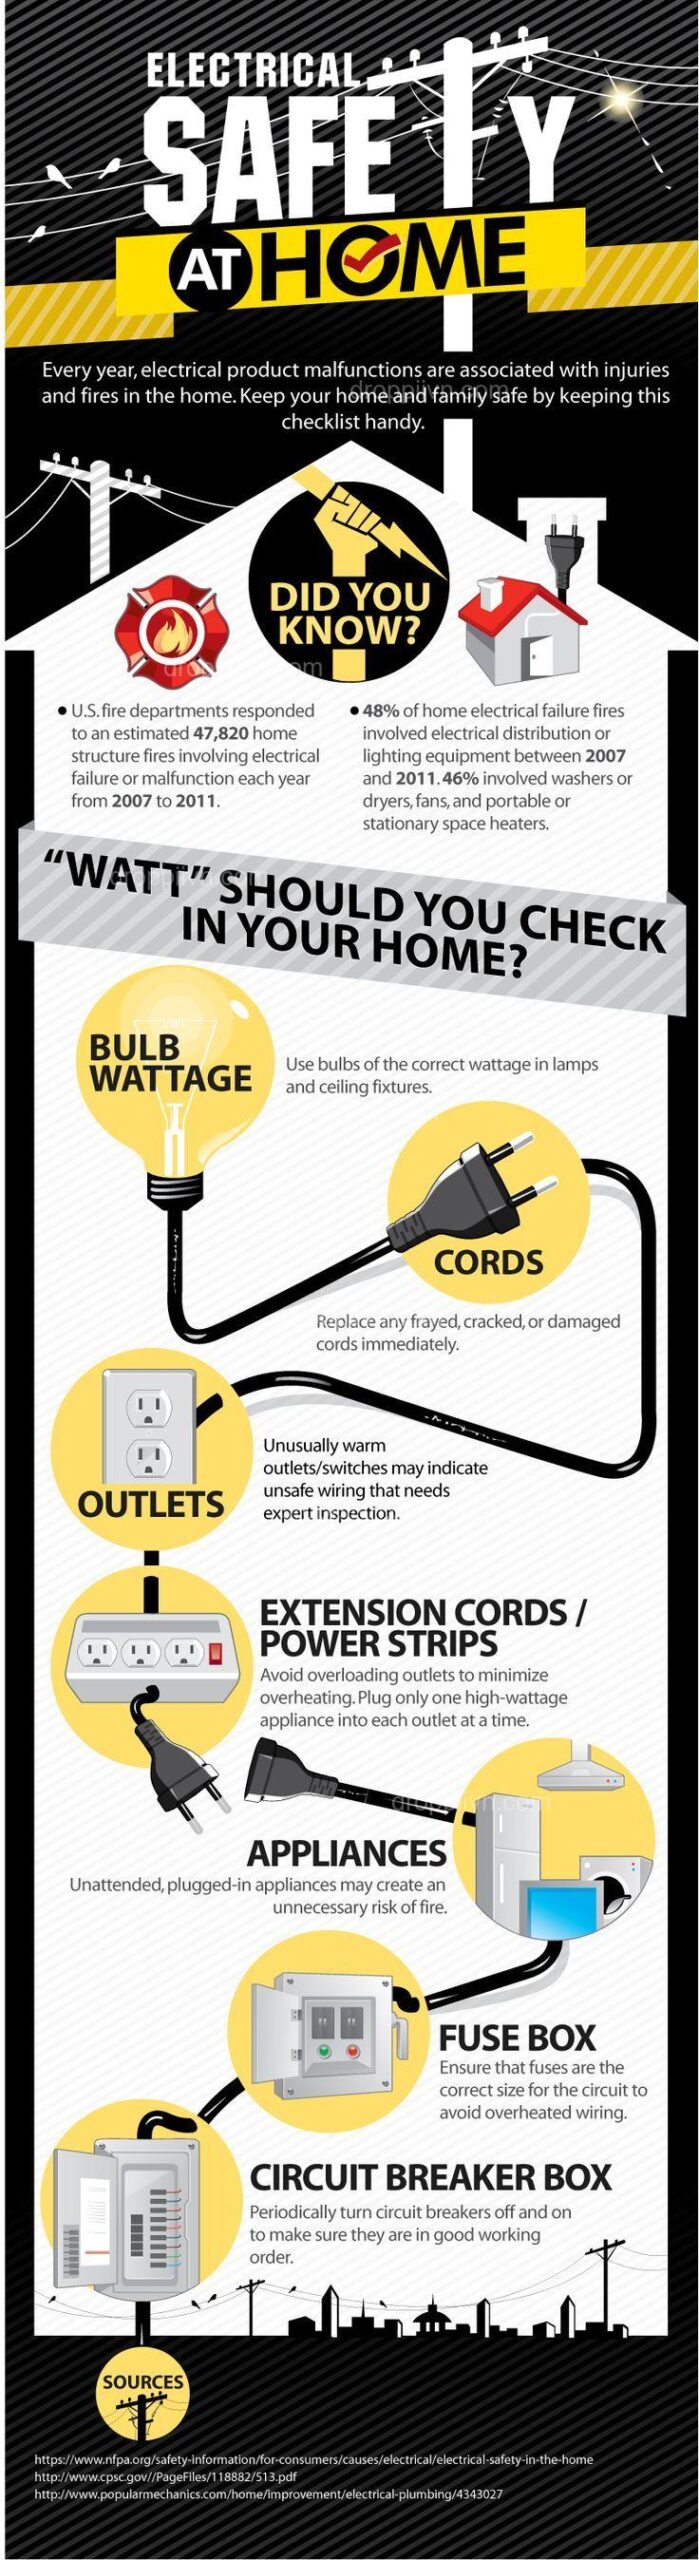 Tips for ensuring your home electrical safety